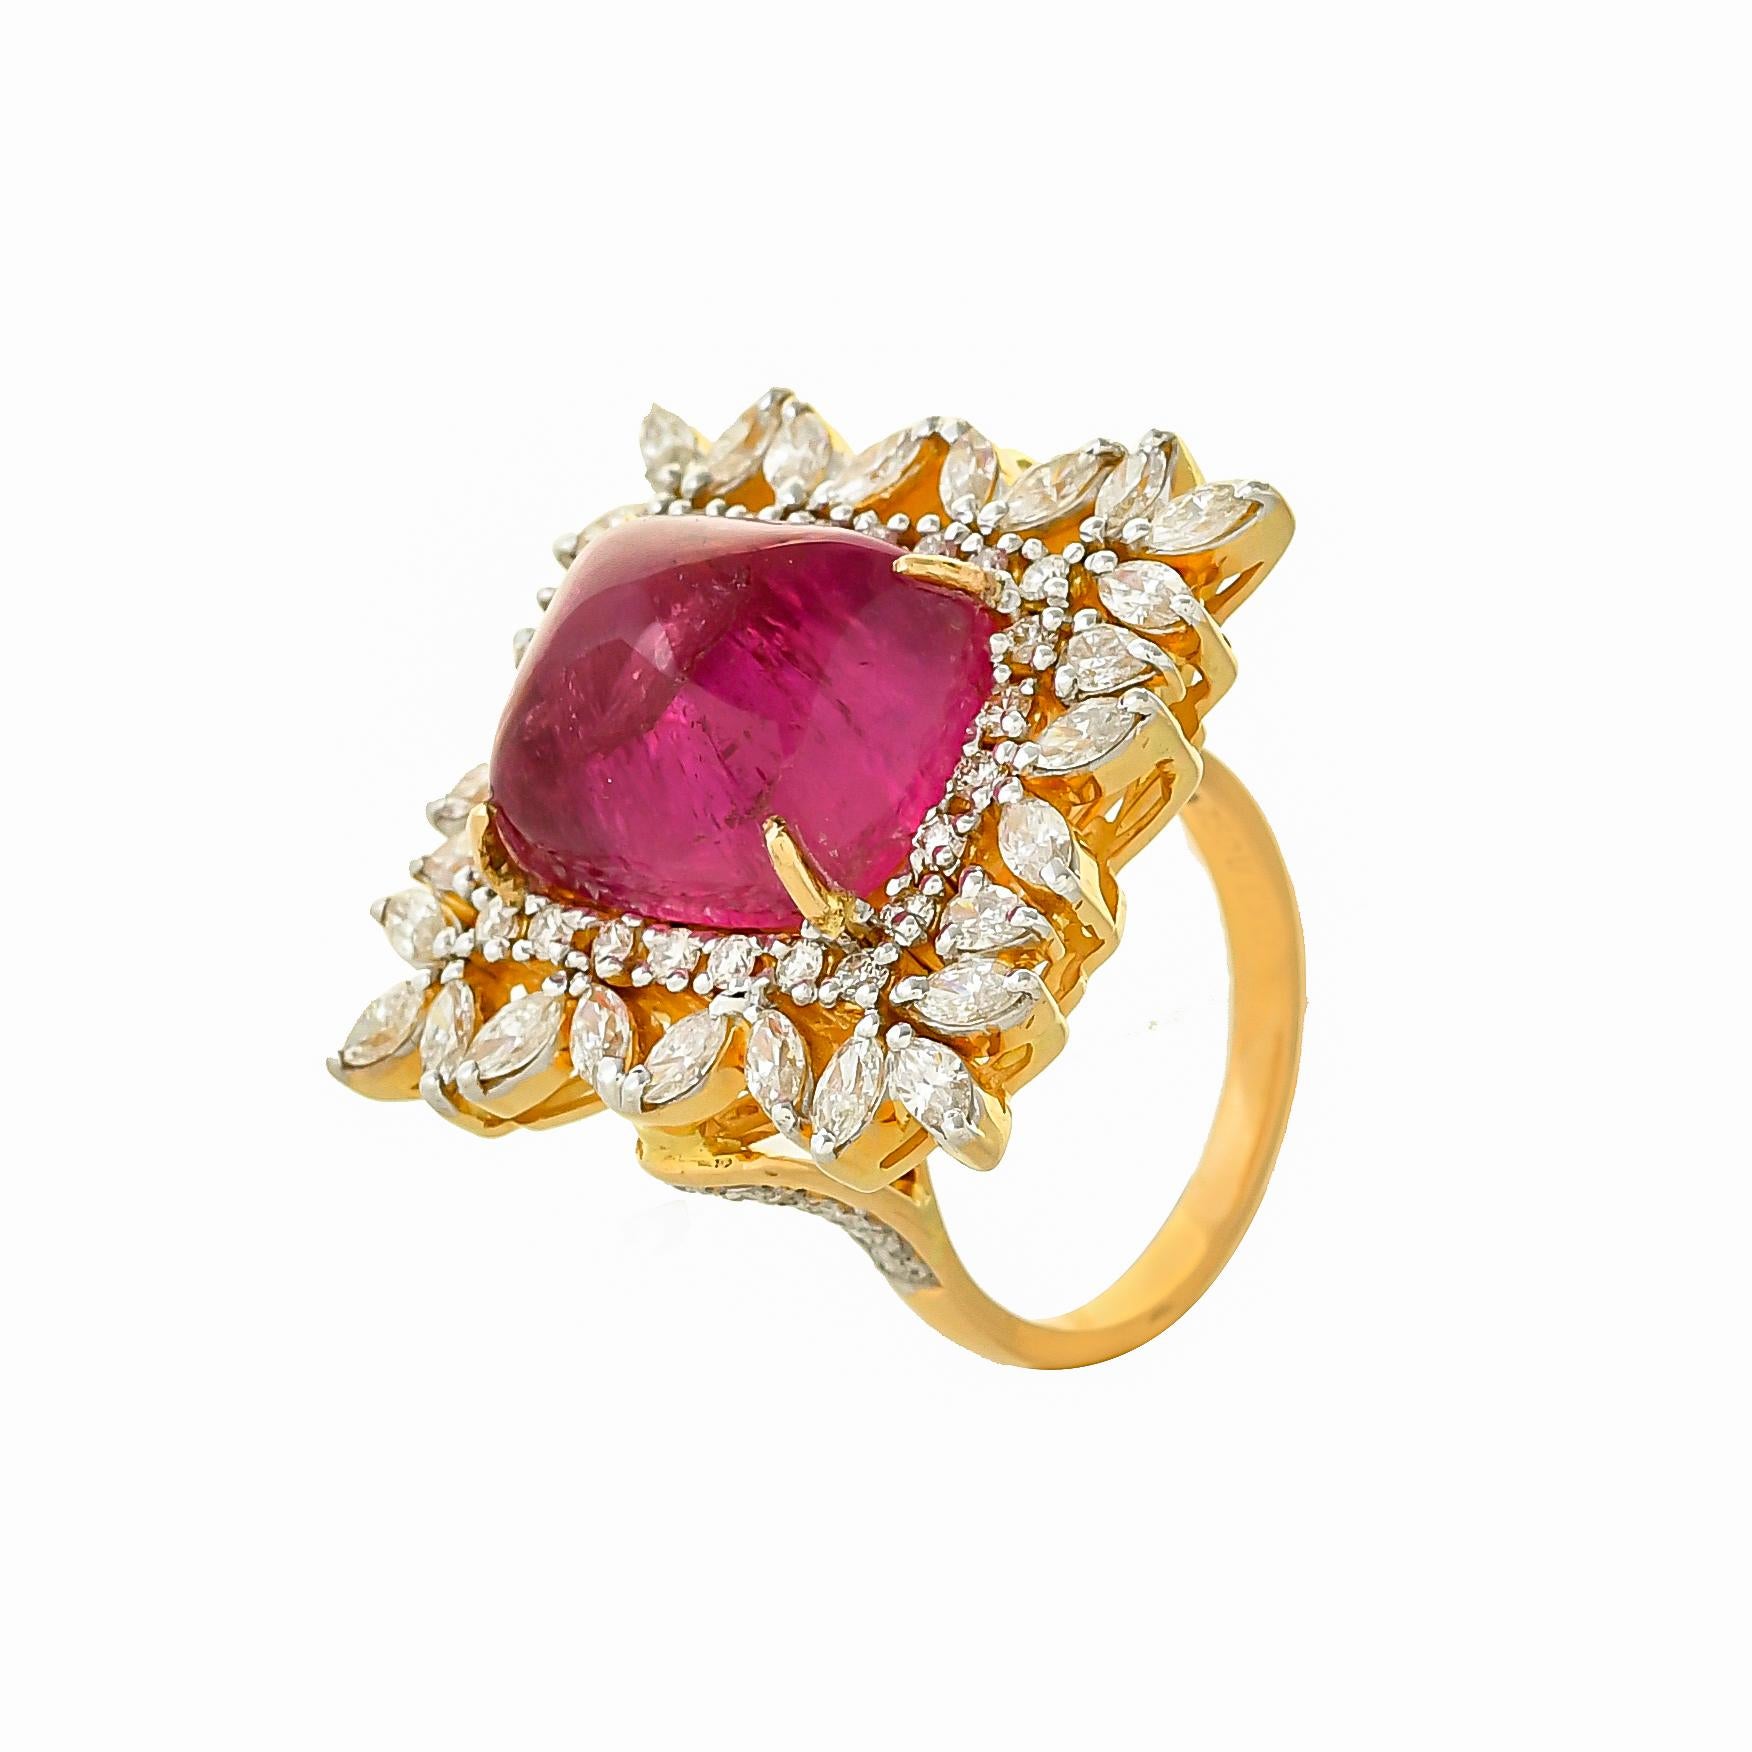 Cabochon 14.00 Carat Rubellite Diamond Cocktail Ring For Sale